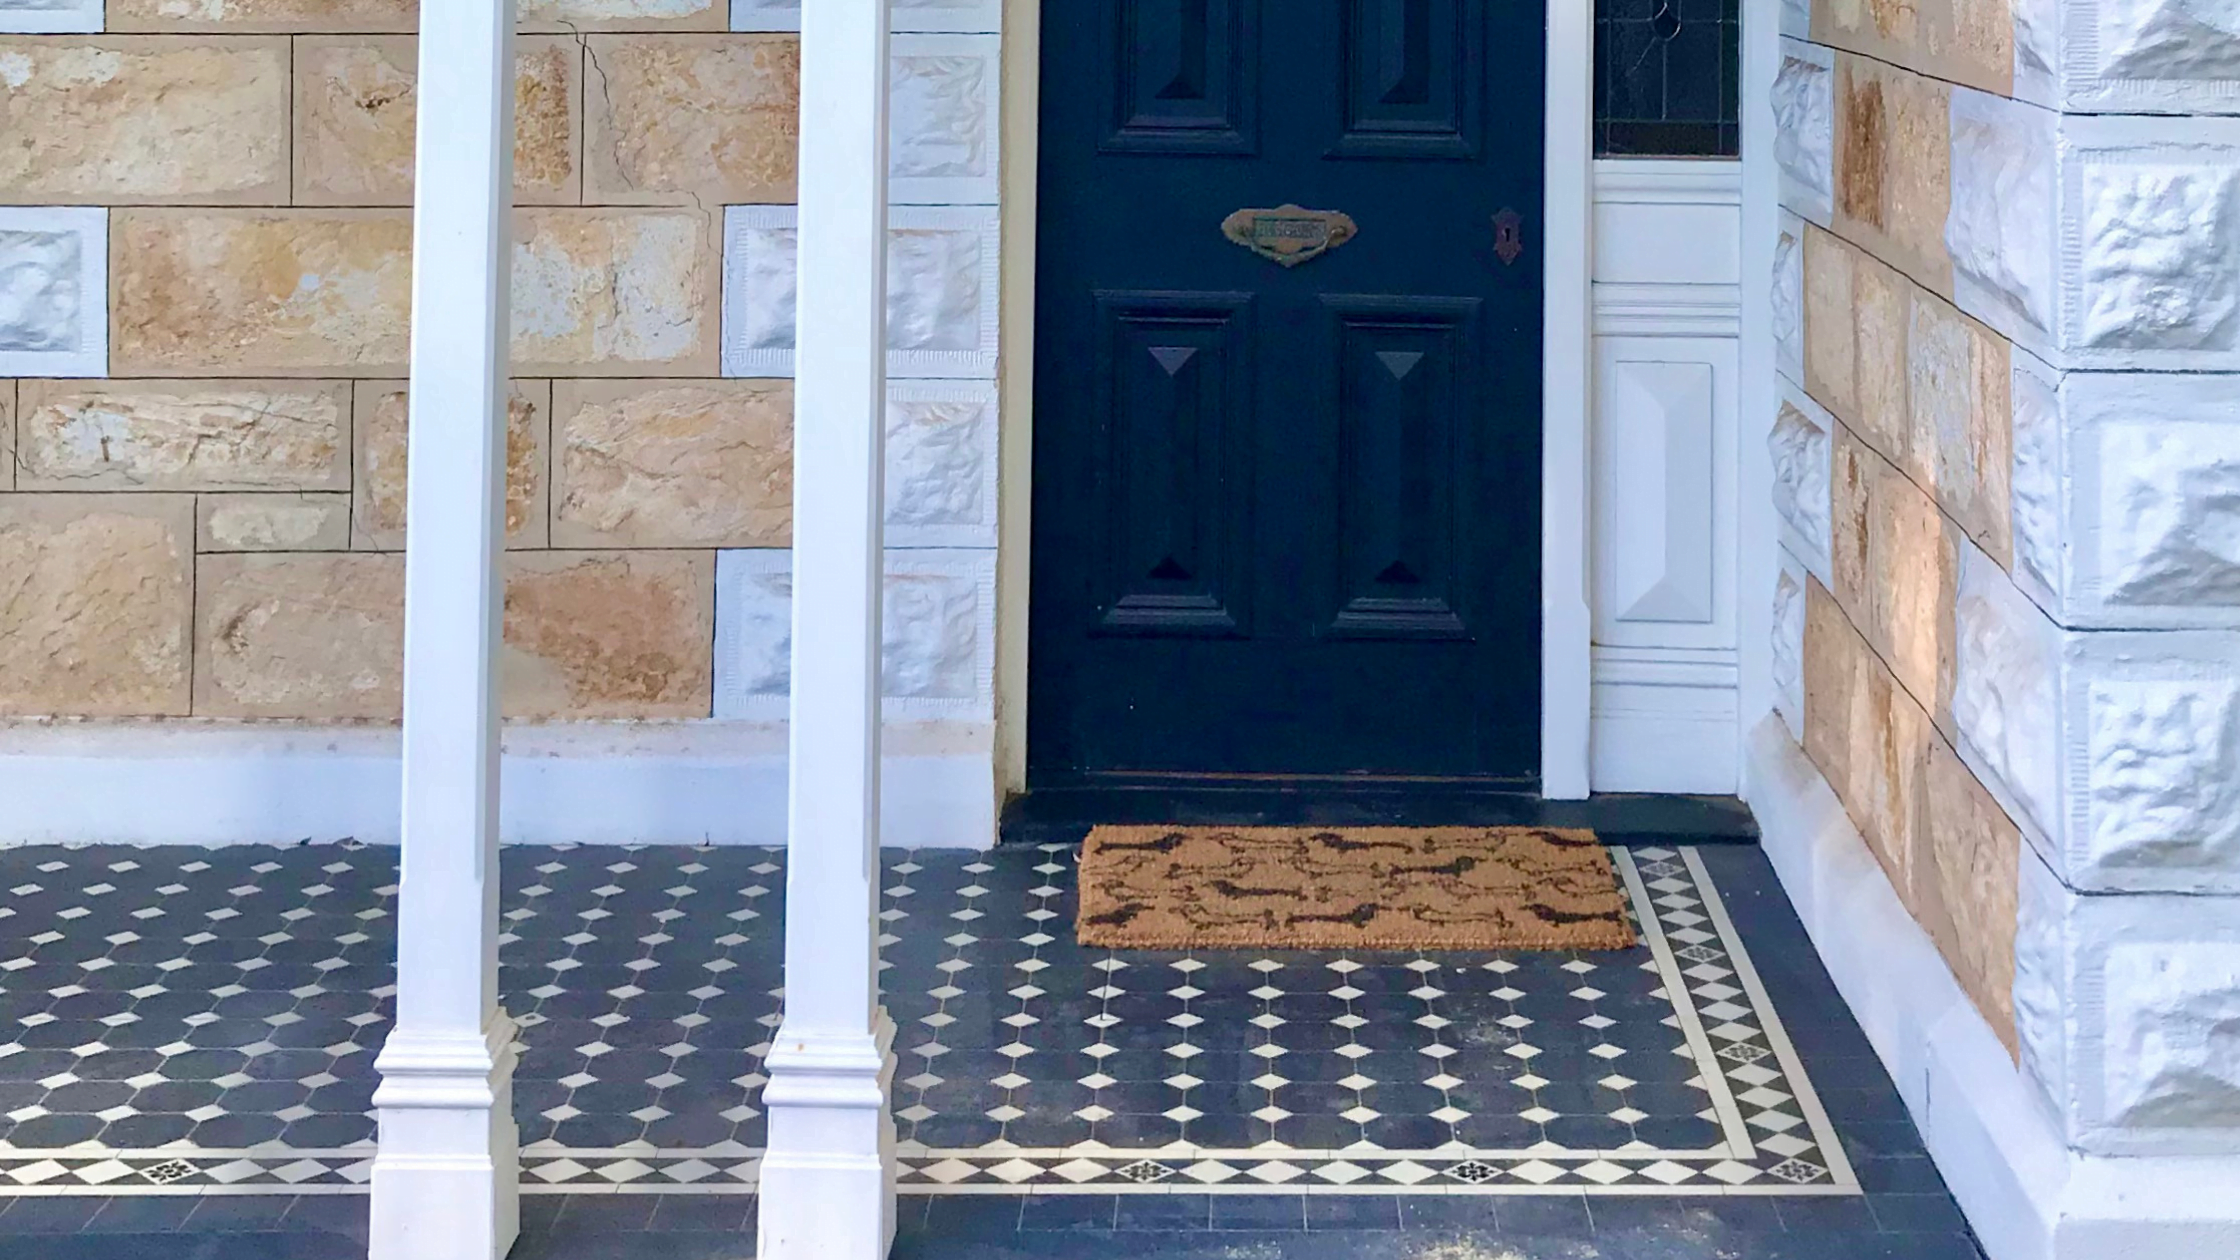 Tiled front porch and black painted front door of a heritage home.